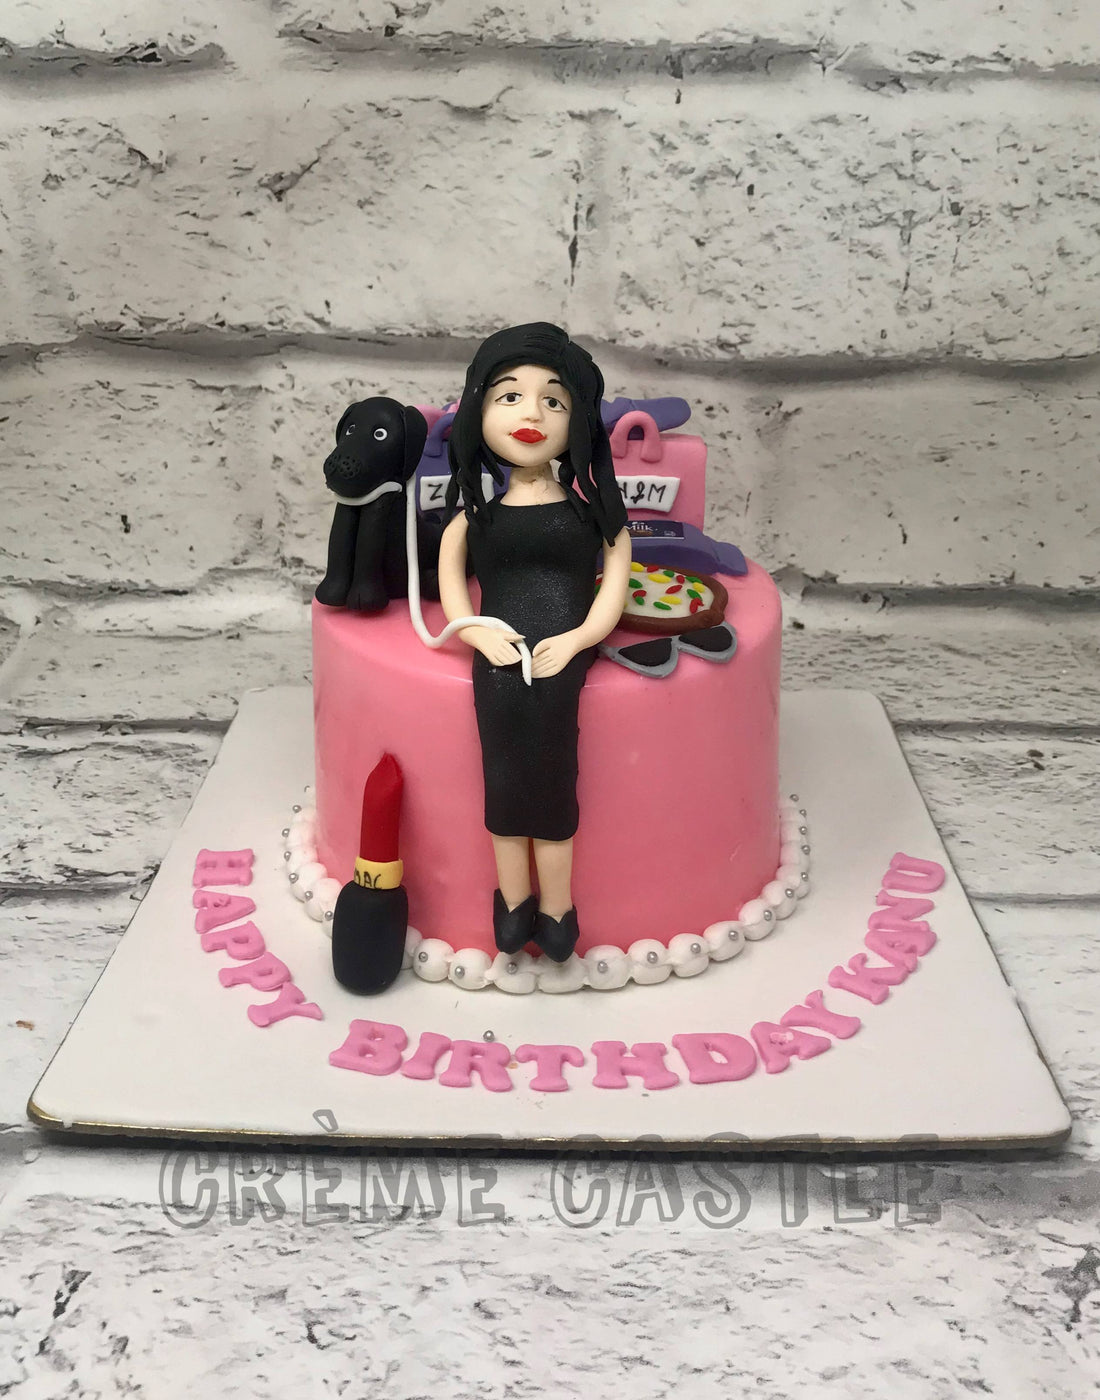 Wife Cake Design in Makeup Theme by Creme Castle